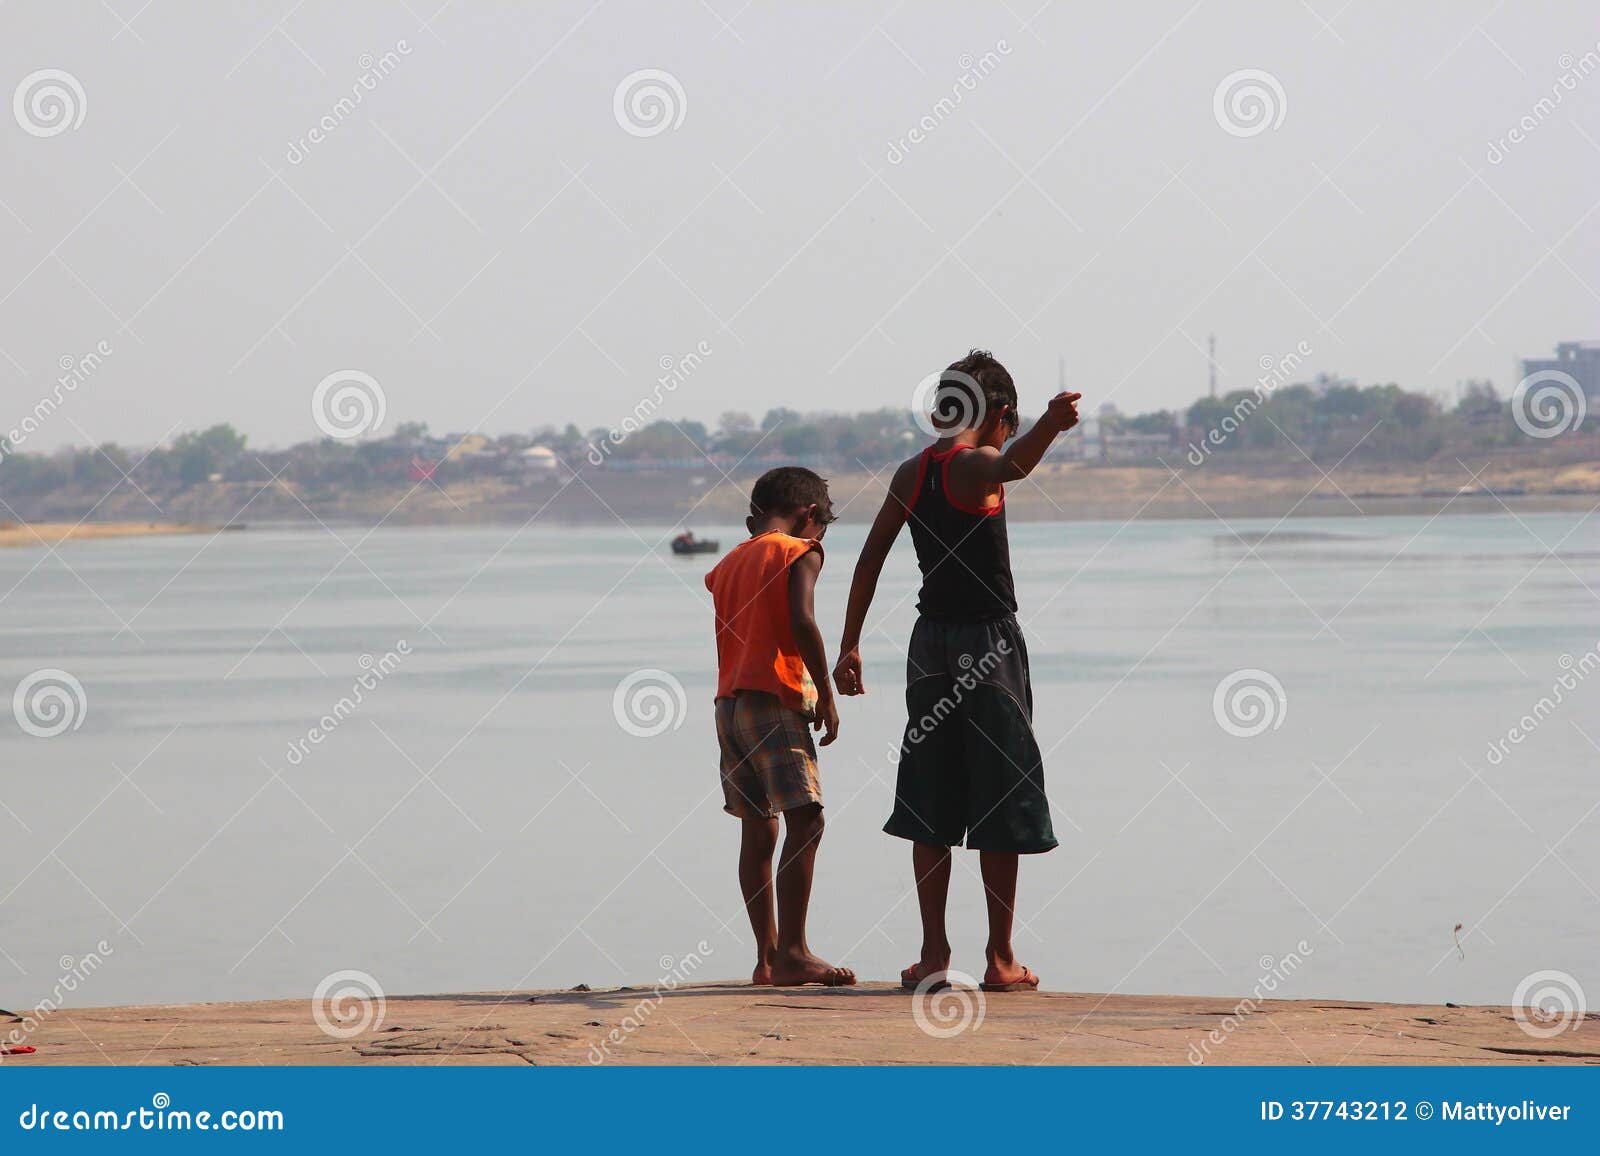 https://thumbs.dreamstime.com/z/indian-boys-fishing-two-whatever-could-find-time-happens-to-be-small-piece-thread-varanasi-india-37743212.jpg